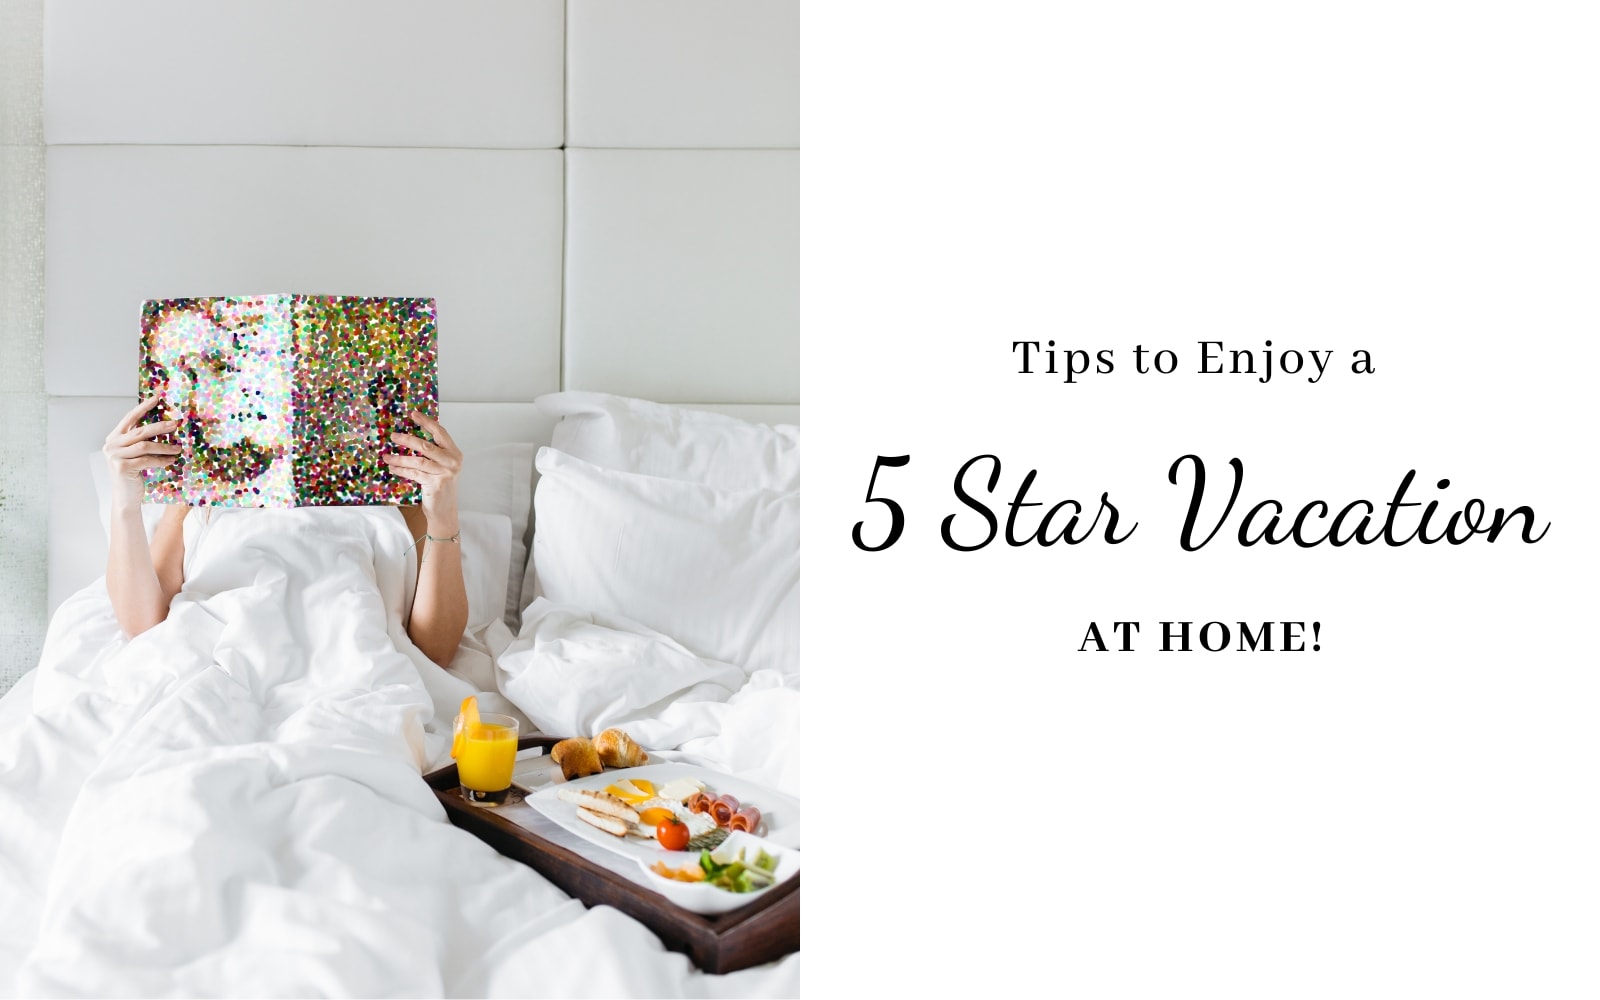 How to Enjoy a 5-Star Vacation at Home!